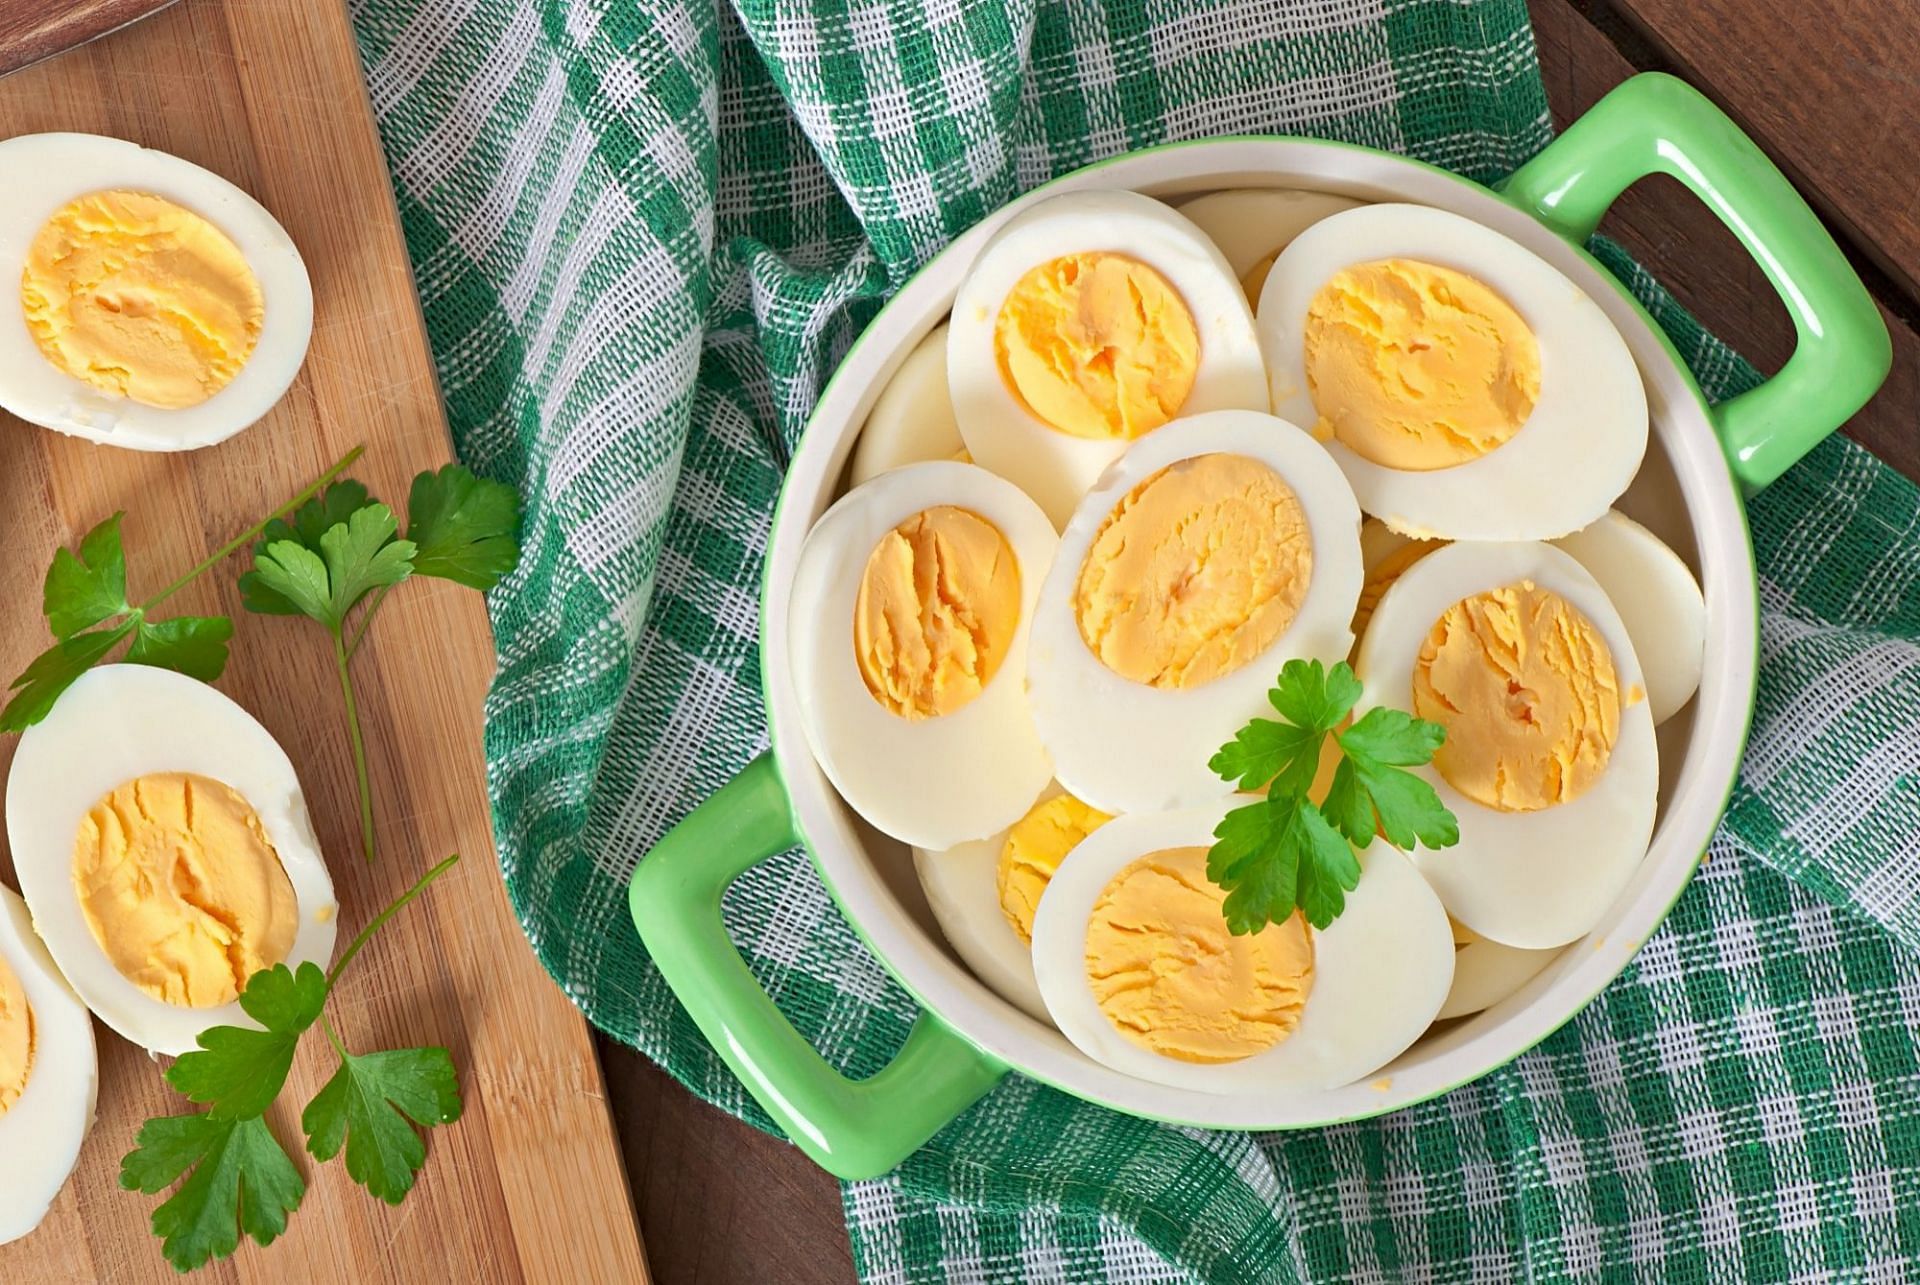 Eggs can be a good addition to your breakfast (Image by timolina on Freepik)